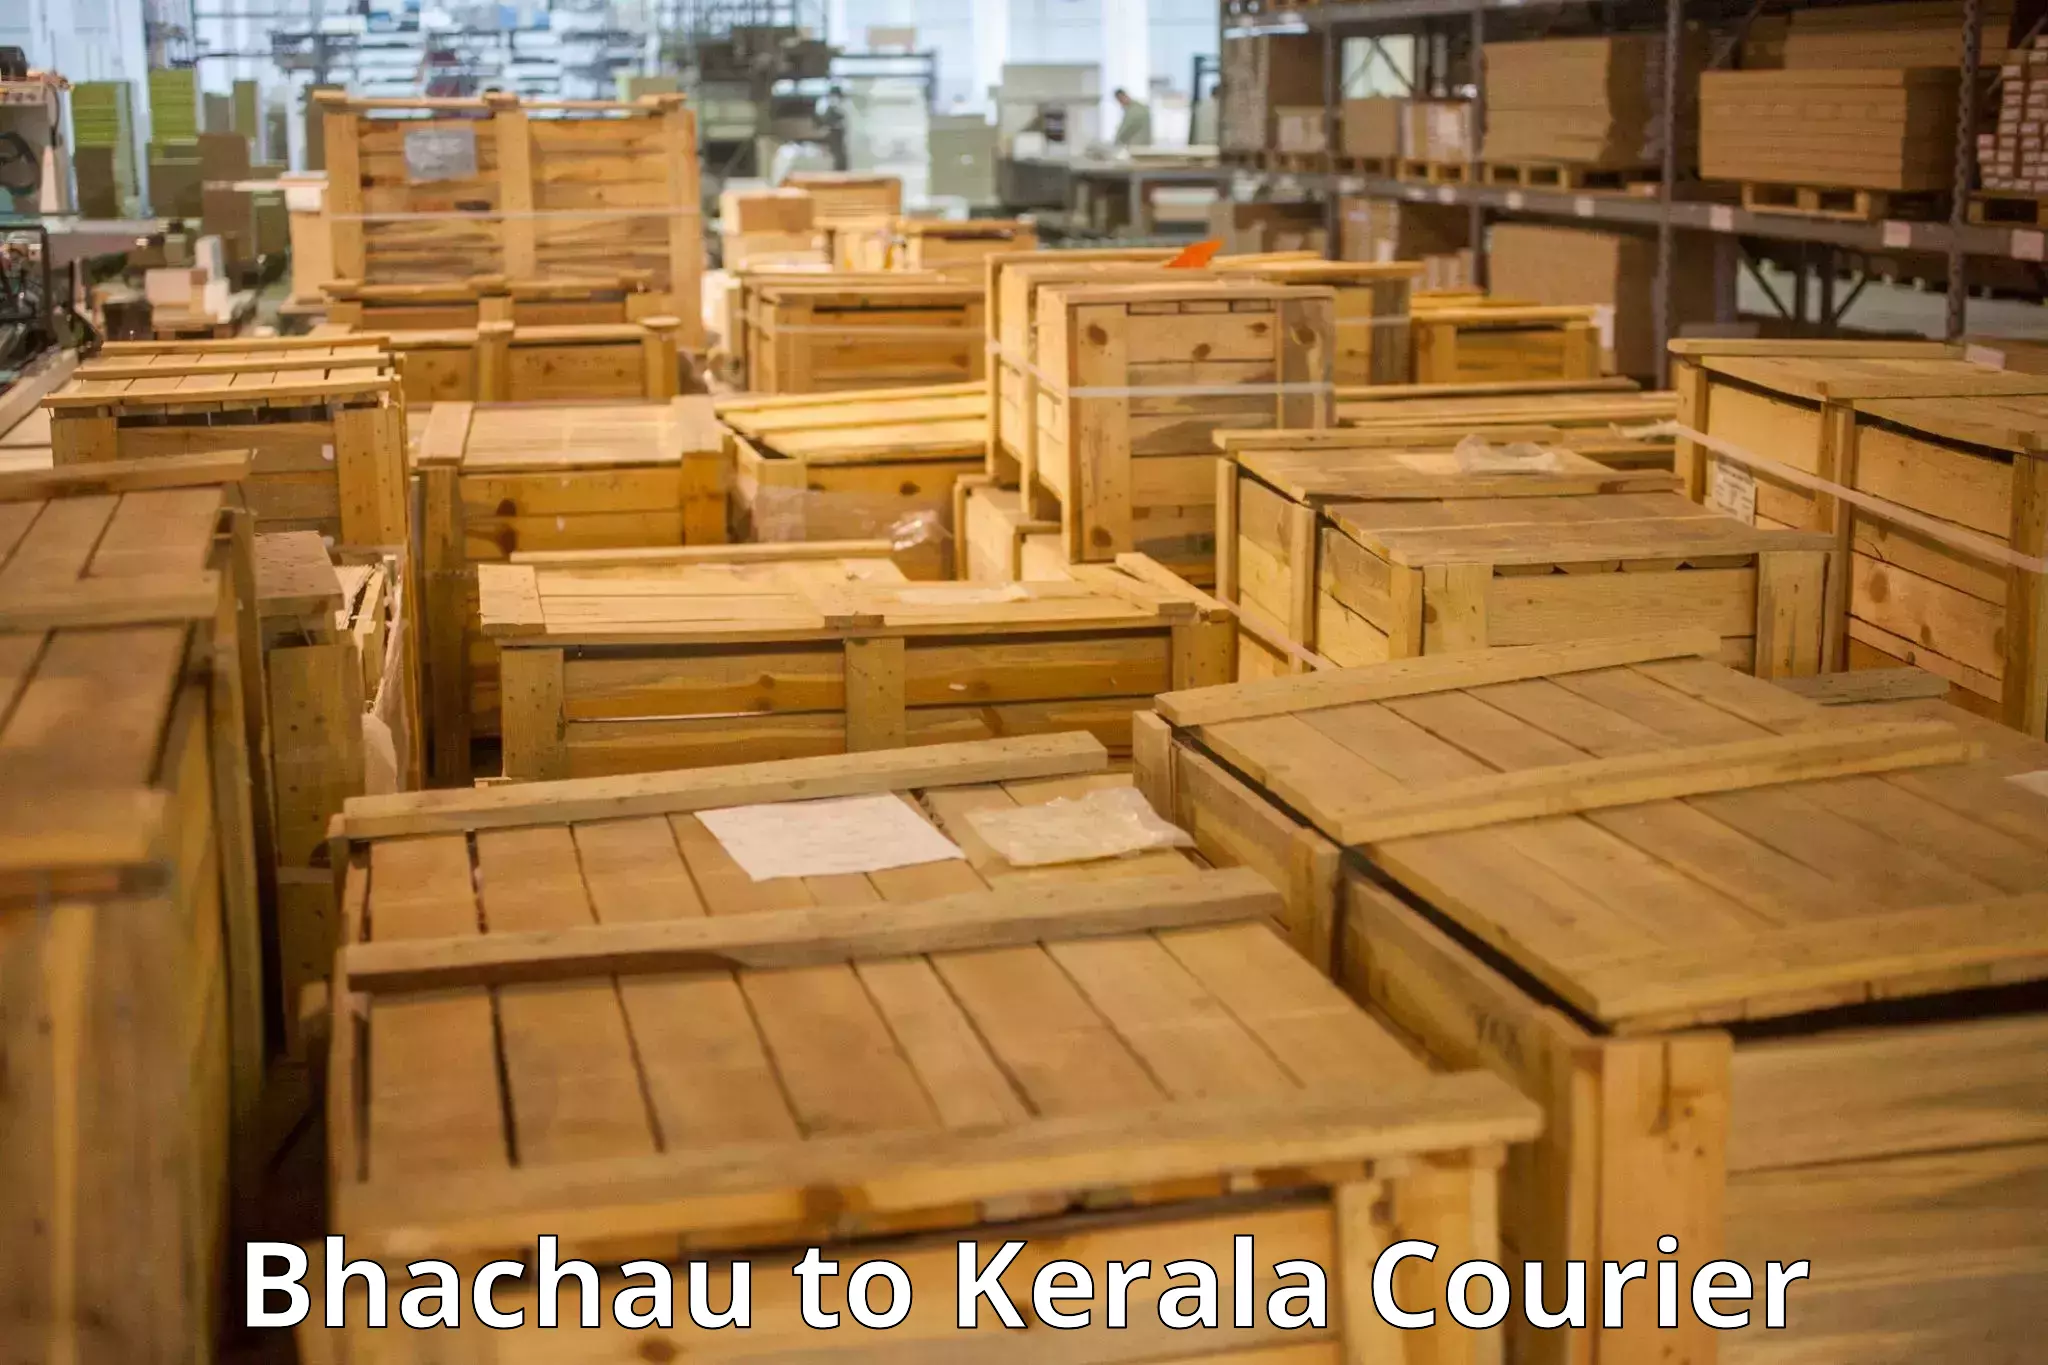 Baggage delivery technology Bhachau to Kerala